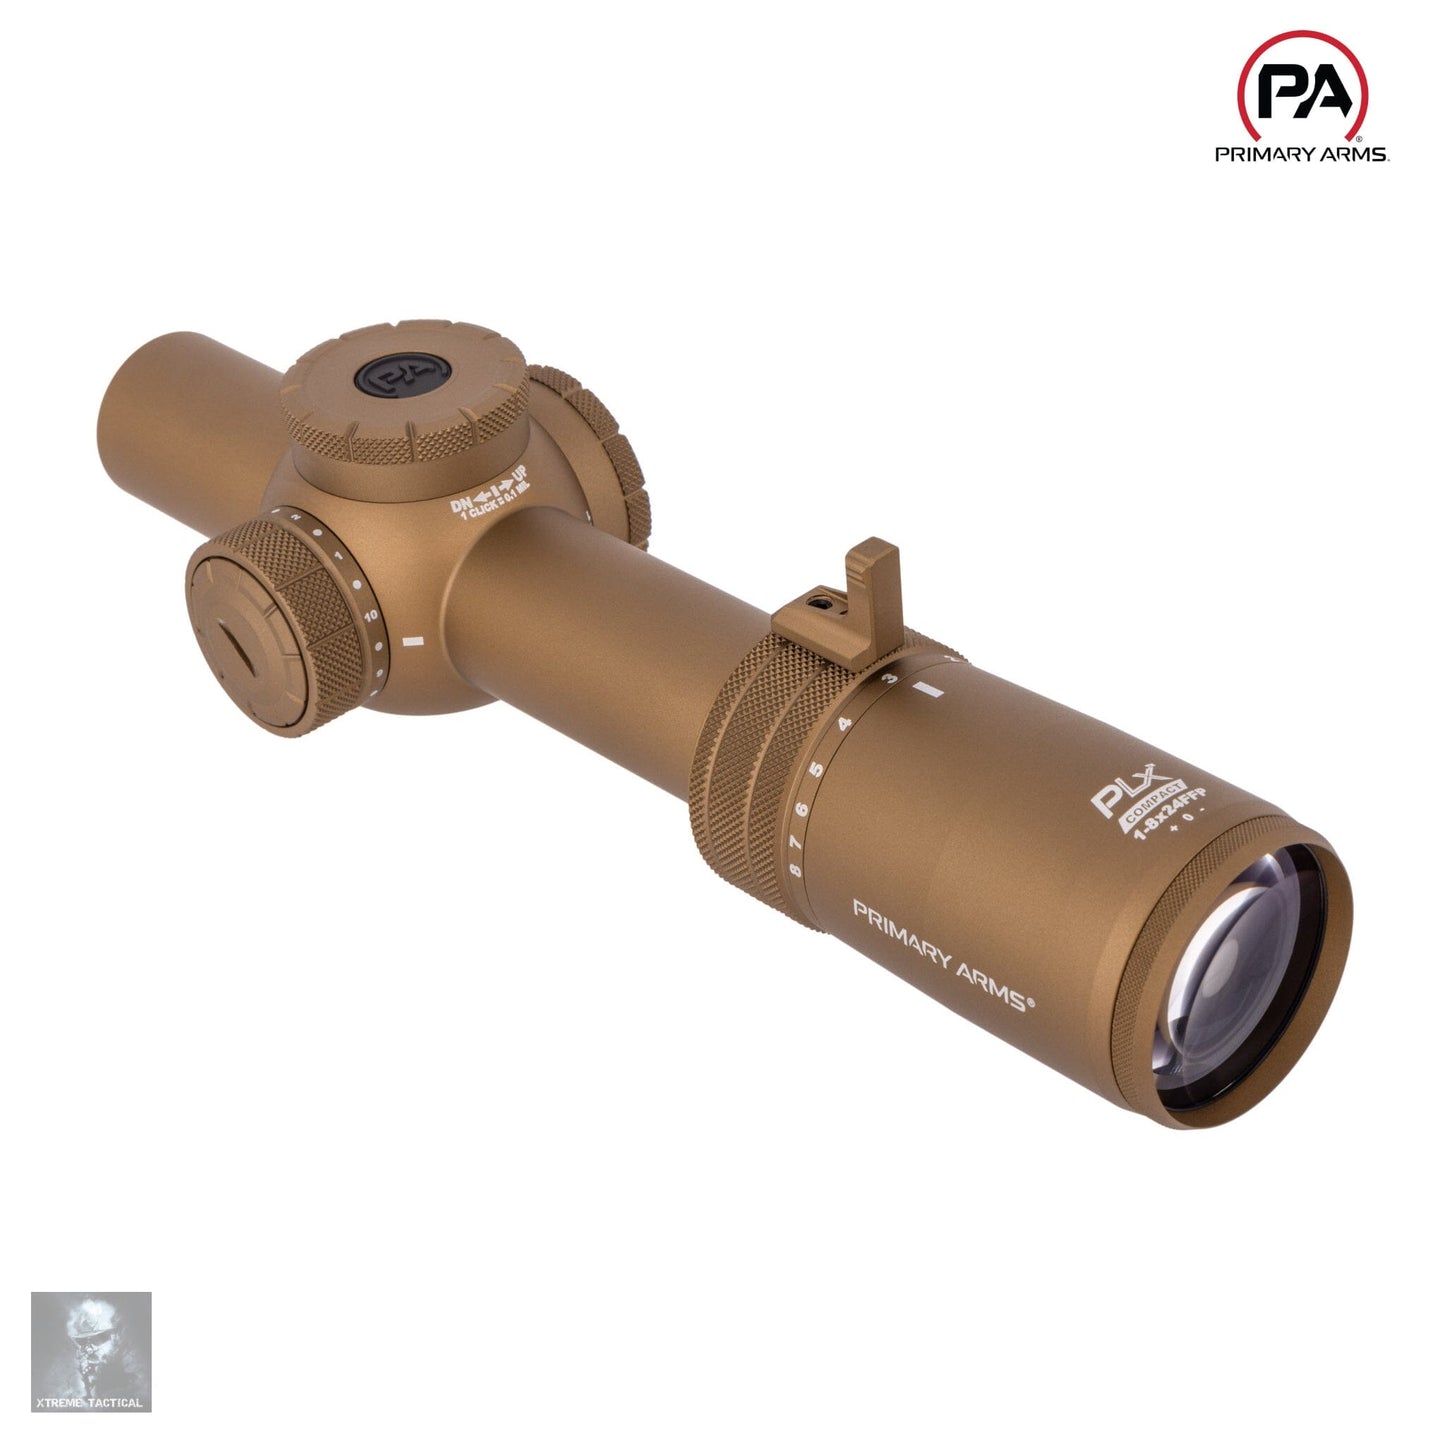 Primary Arms Compact PLxC 1-8x24 FFP Rifle Scope - ACSS Raptor M8 Yard 5.56/.308 Reticle - FDE LPVO Rifle Scope Primary Arms 